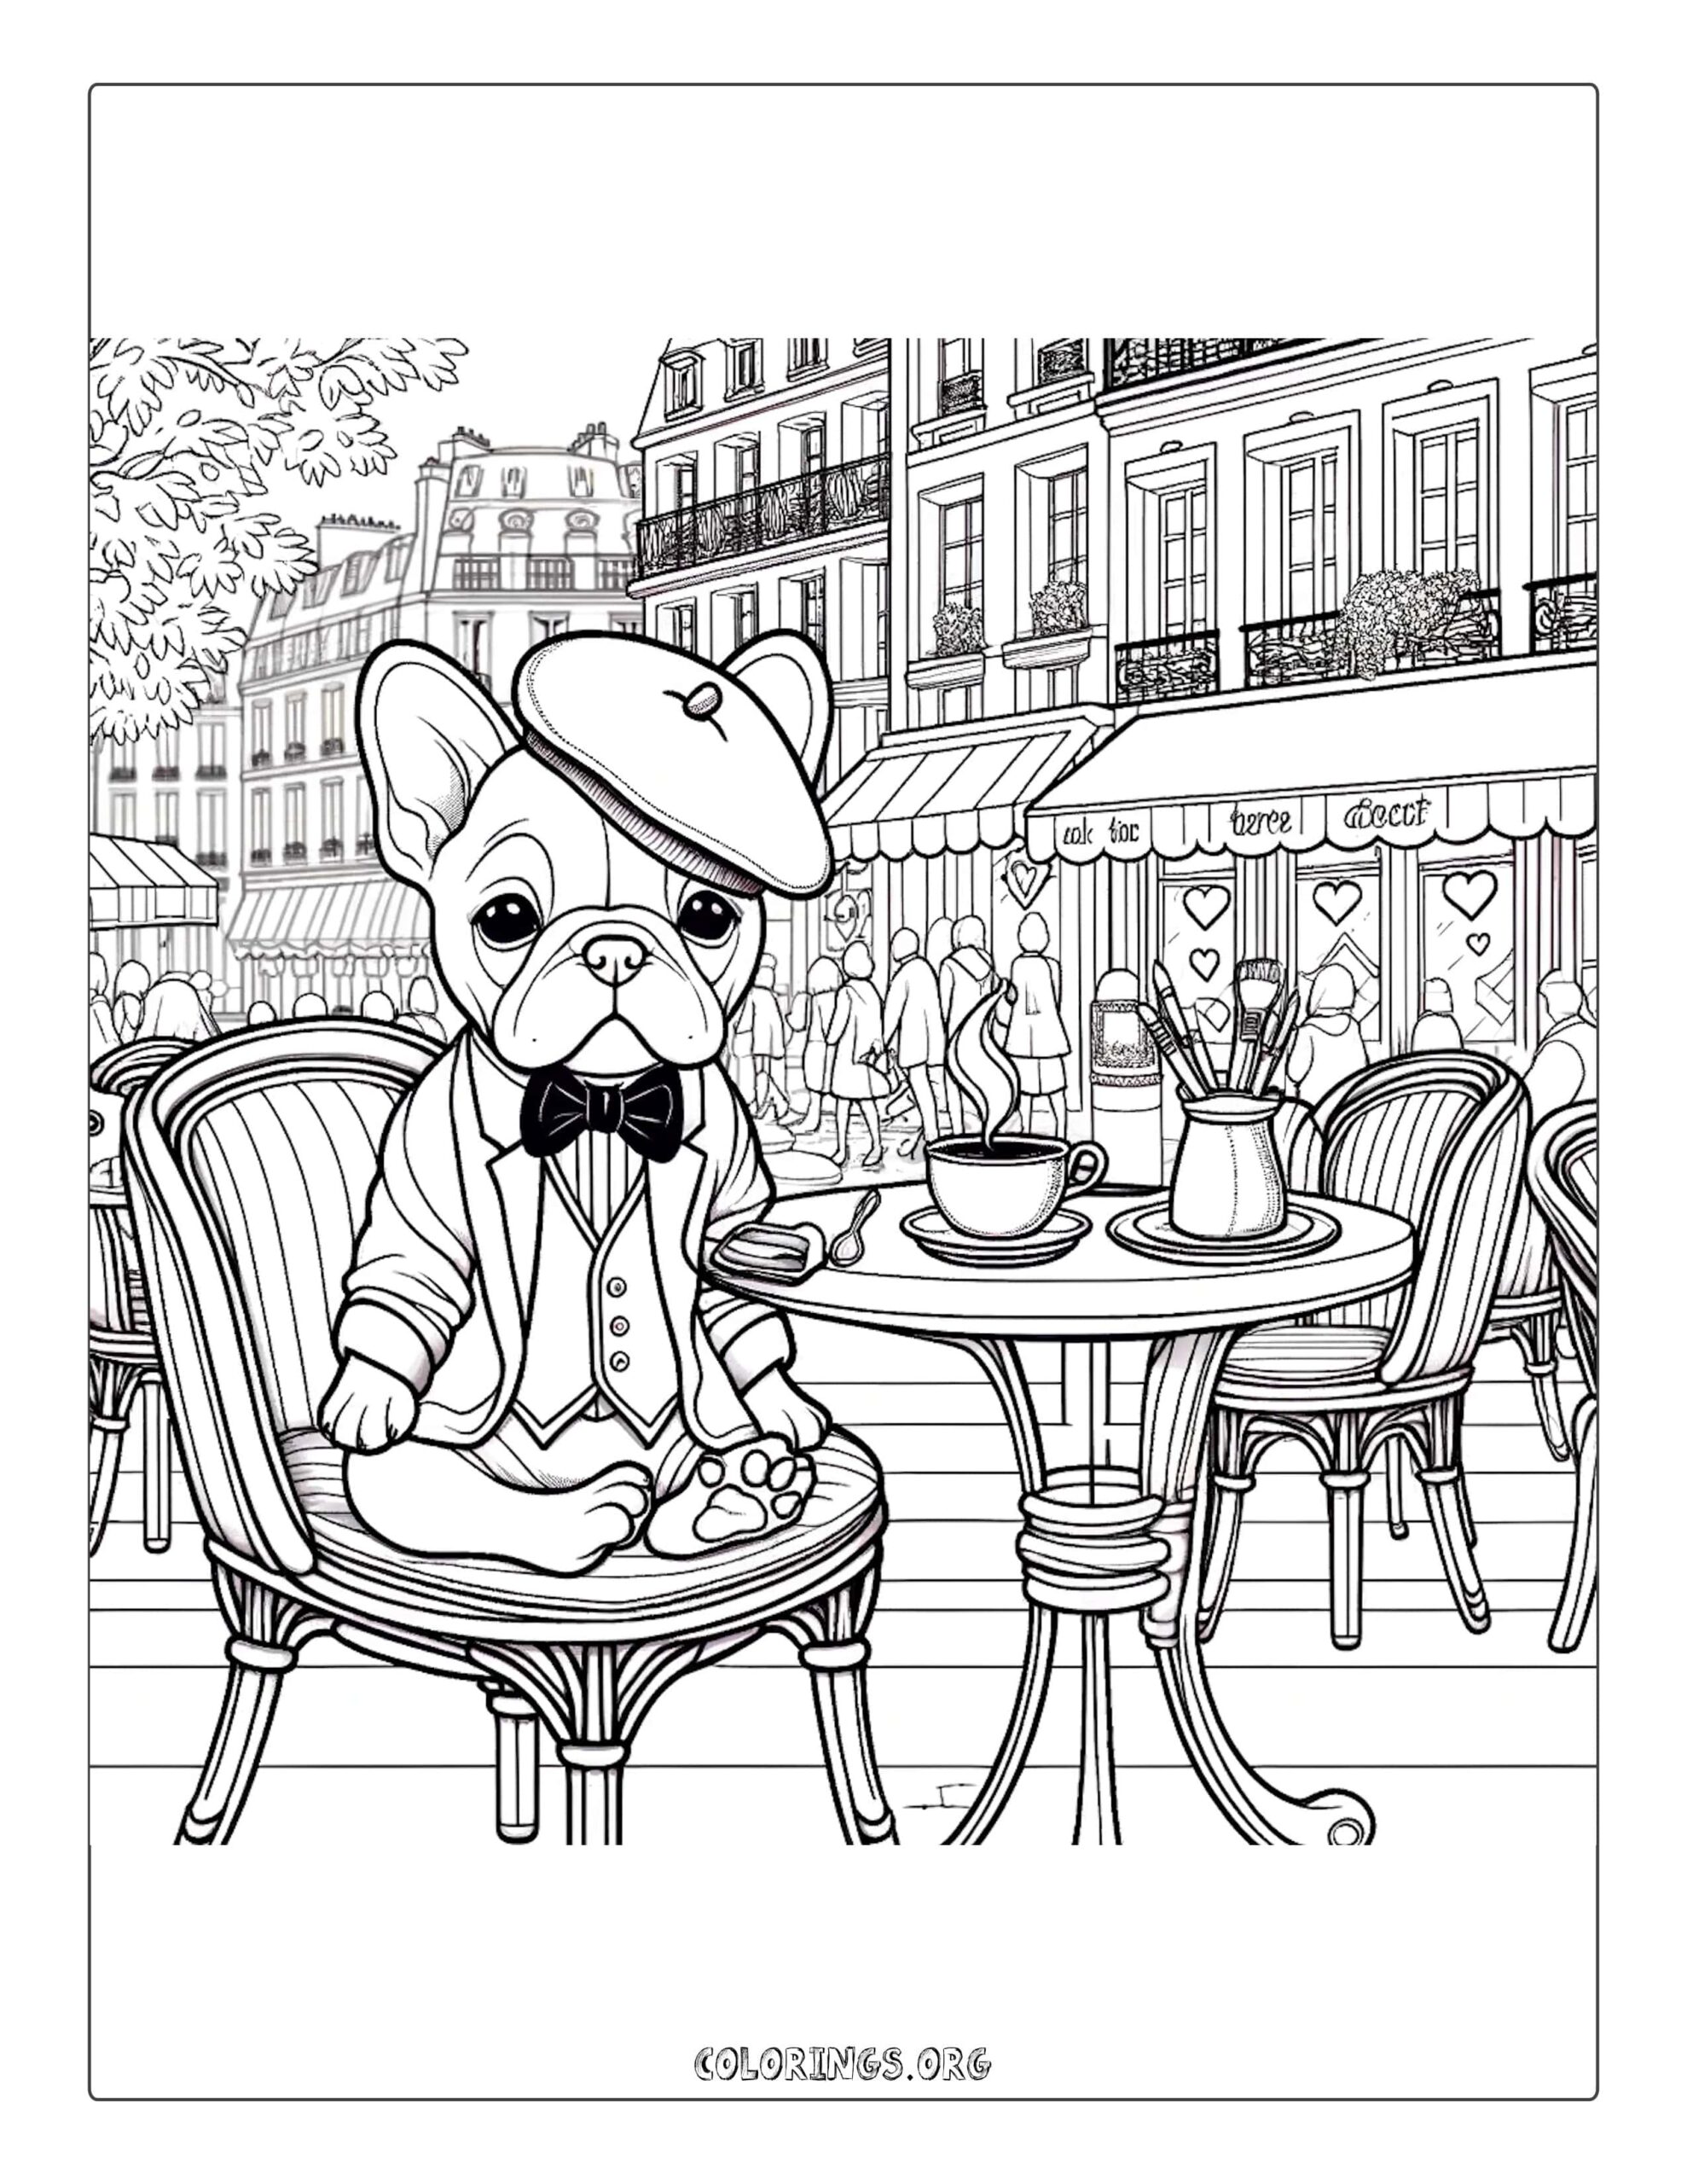 French bulldog in Paris café coloring page